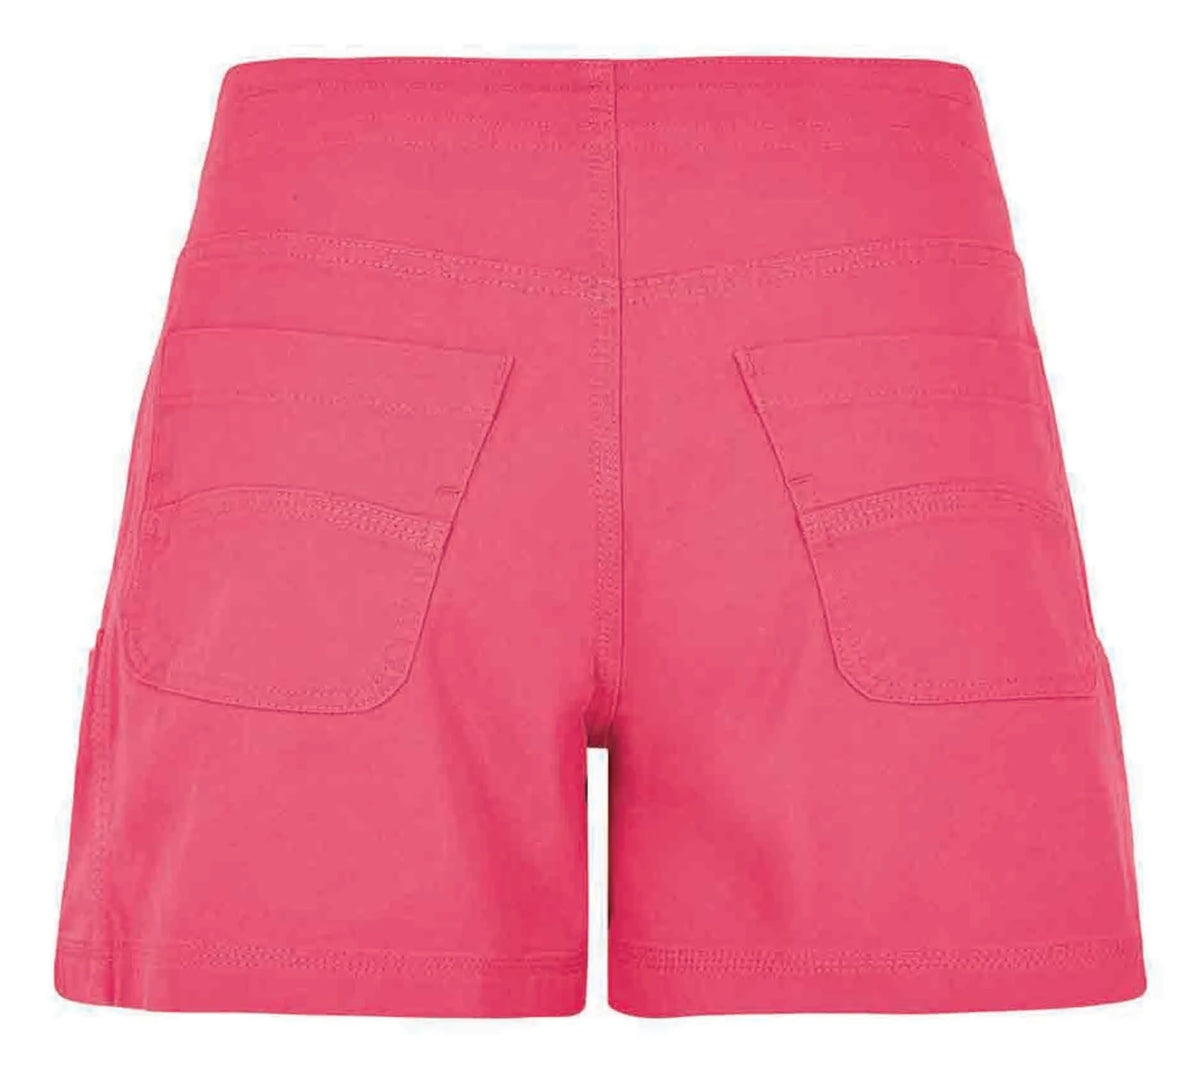 Women's Willoughby Hot Pink coloured Summer shorts from Weird Fish.